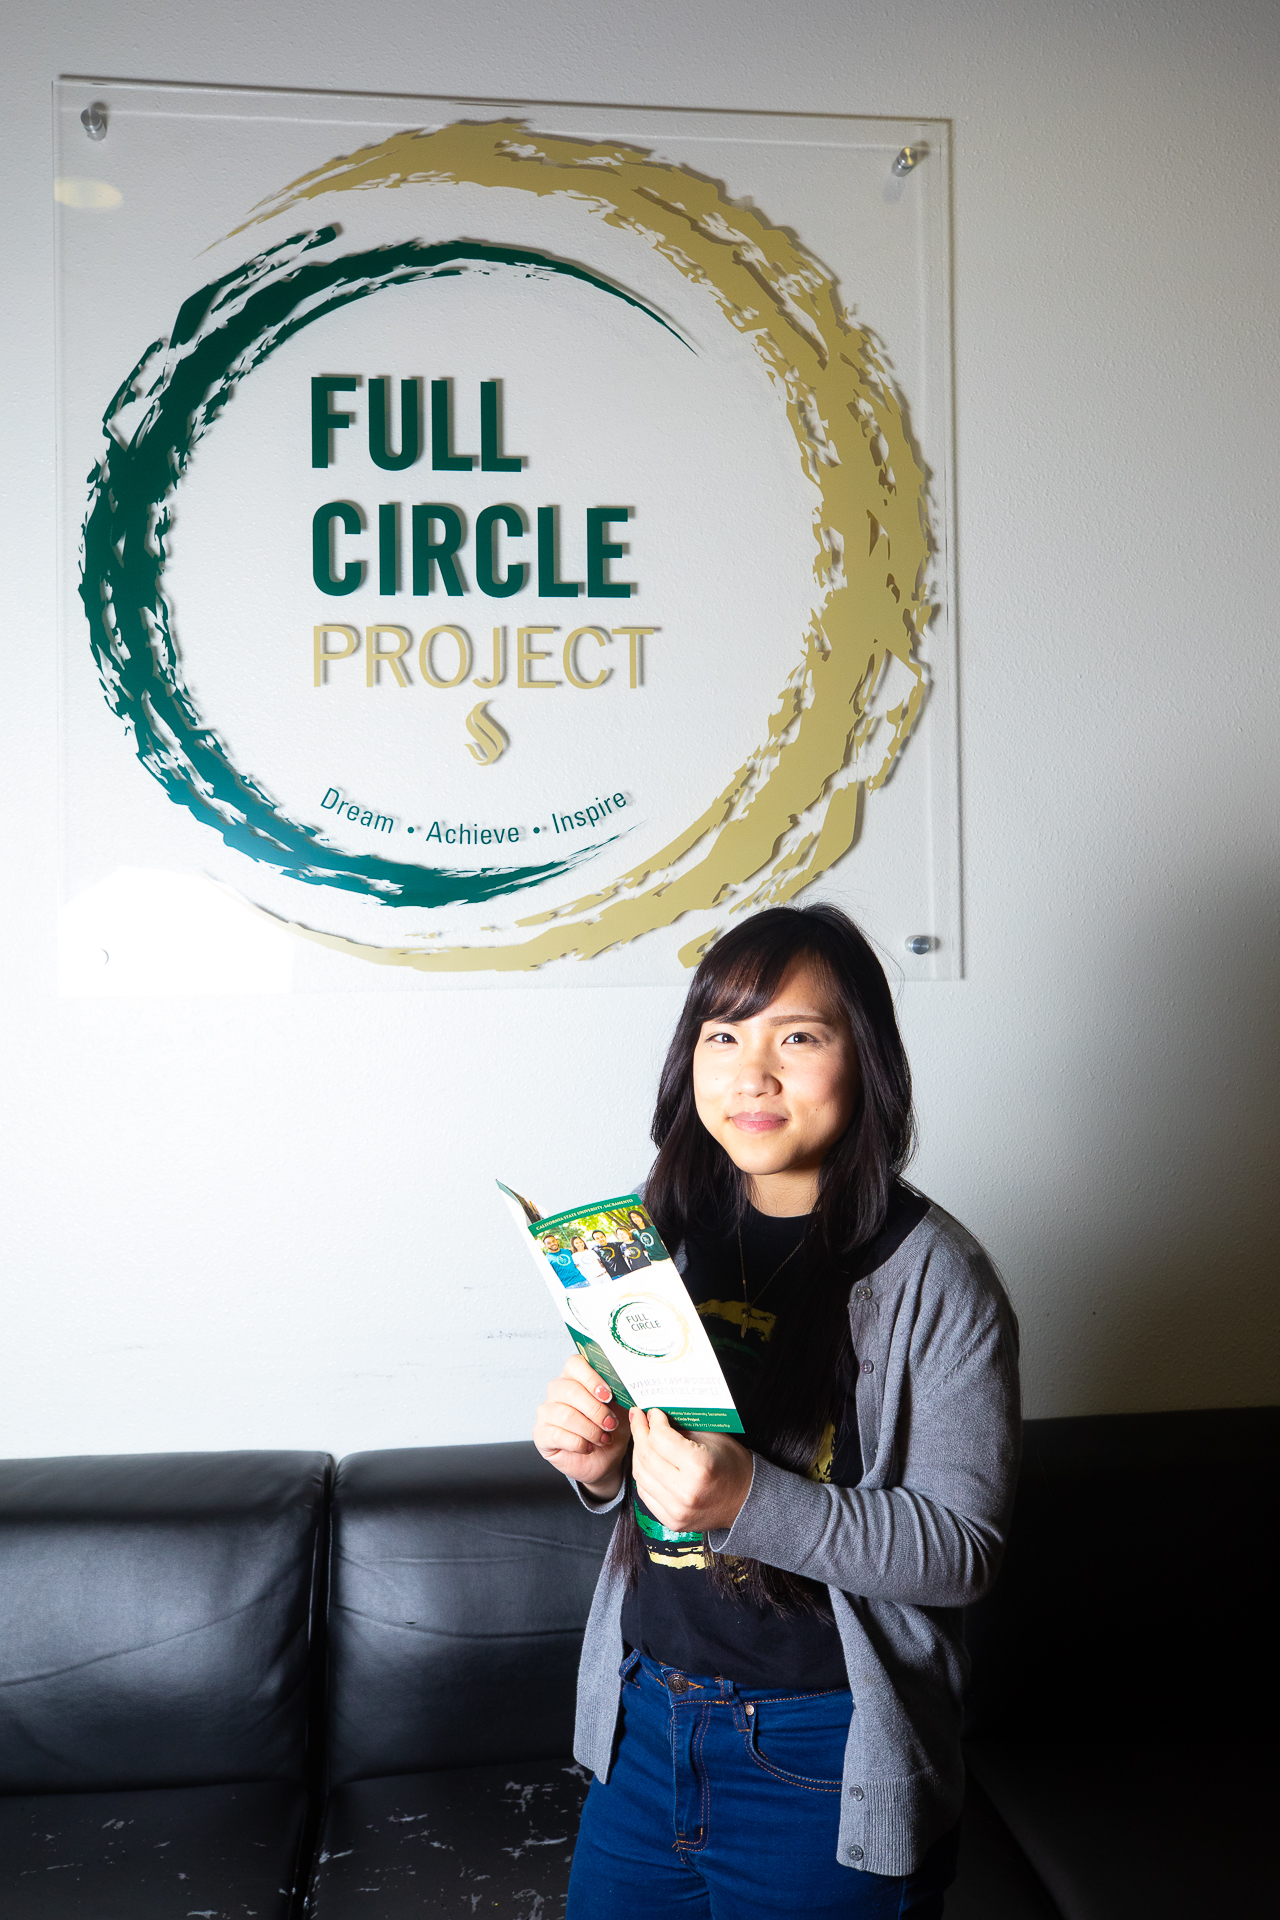 Sacramento State student Hnou Lee, standing indoors, in front of a Full Circle Project logo on the wall, holding a Full Circle Project brochure